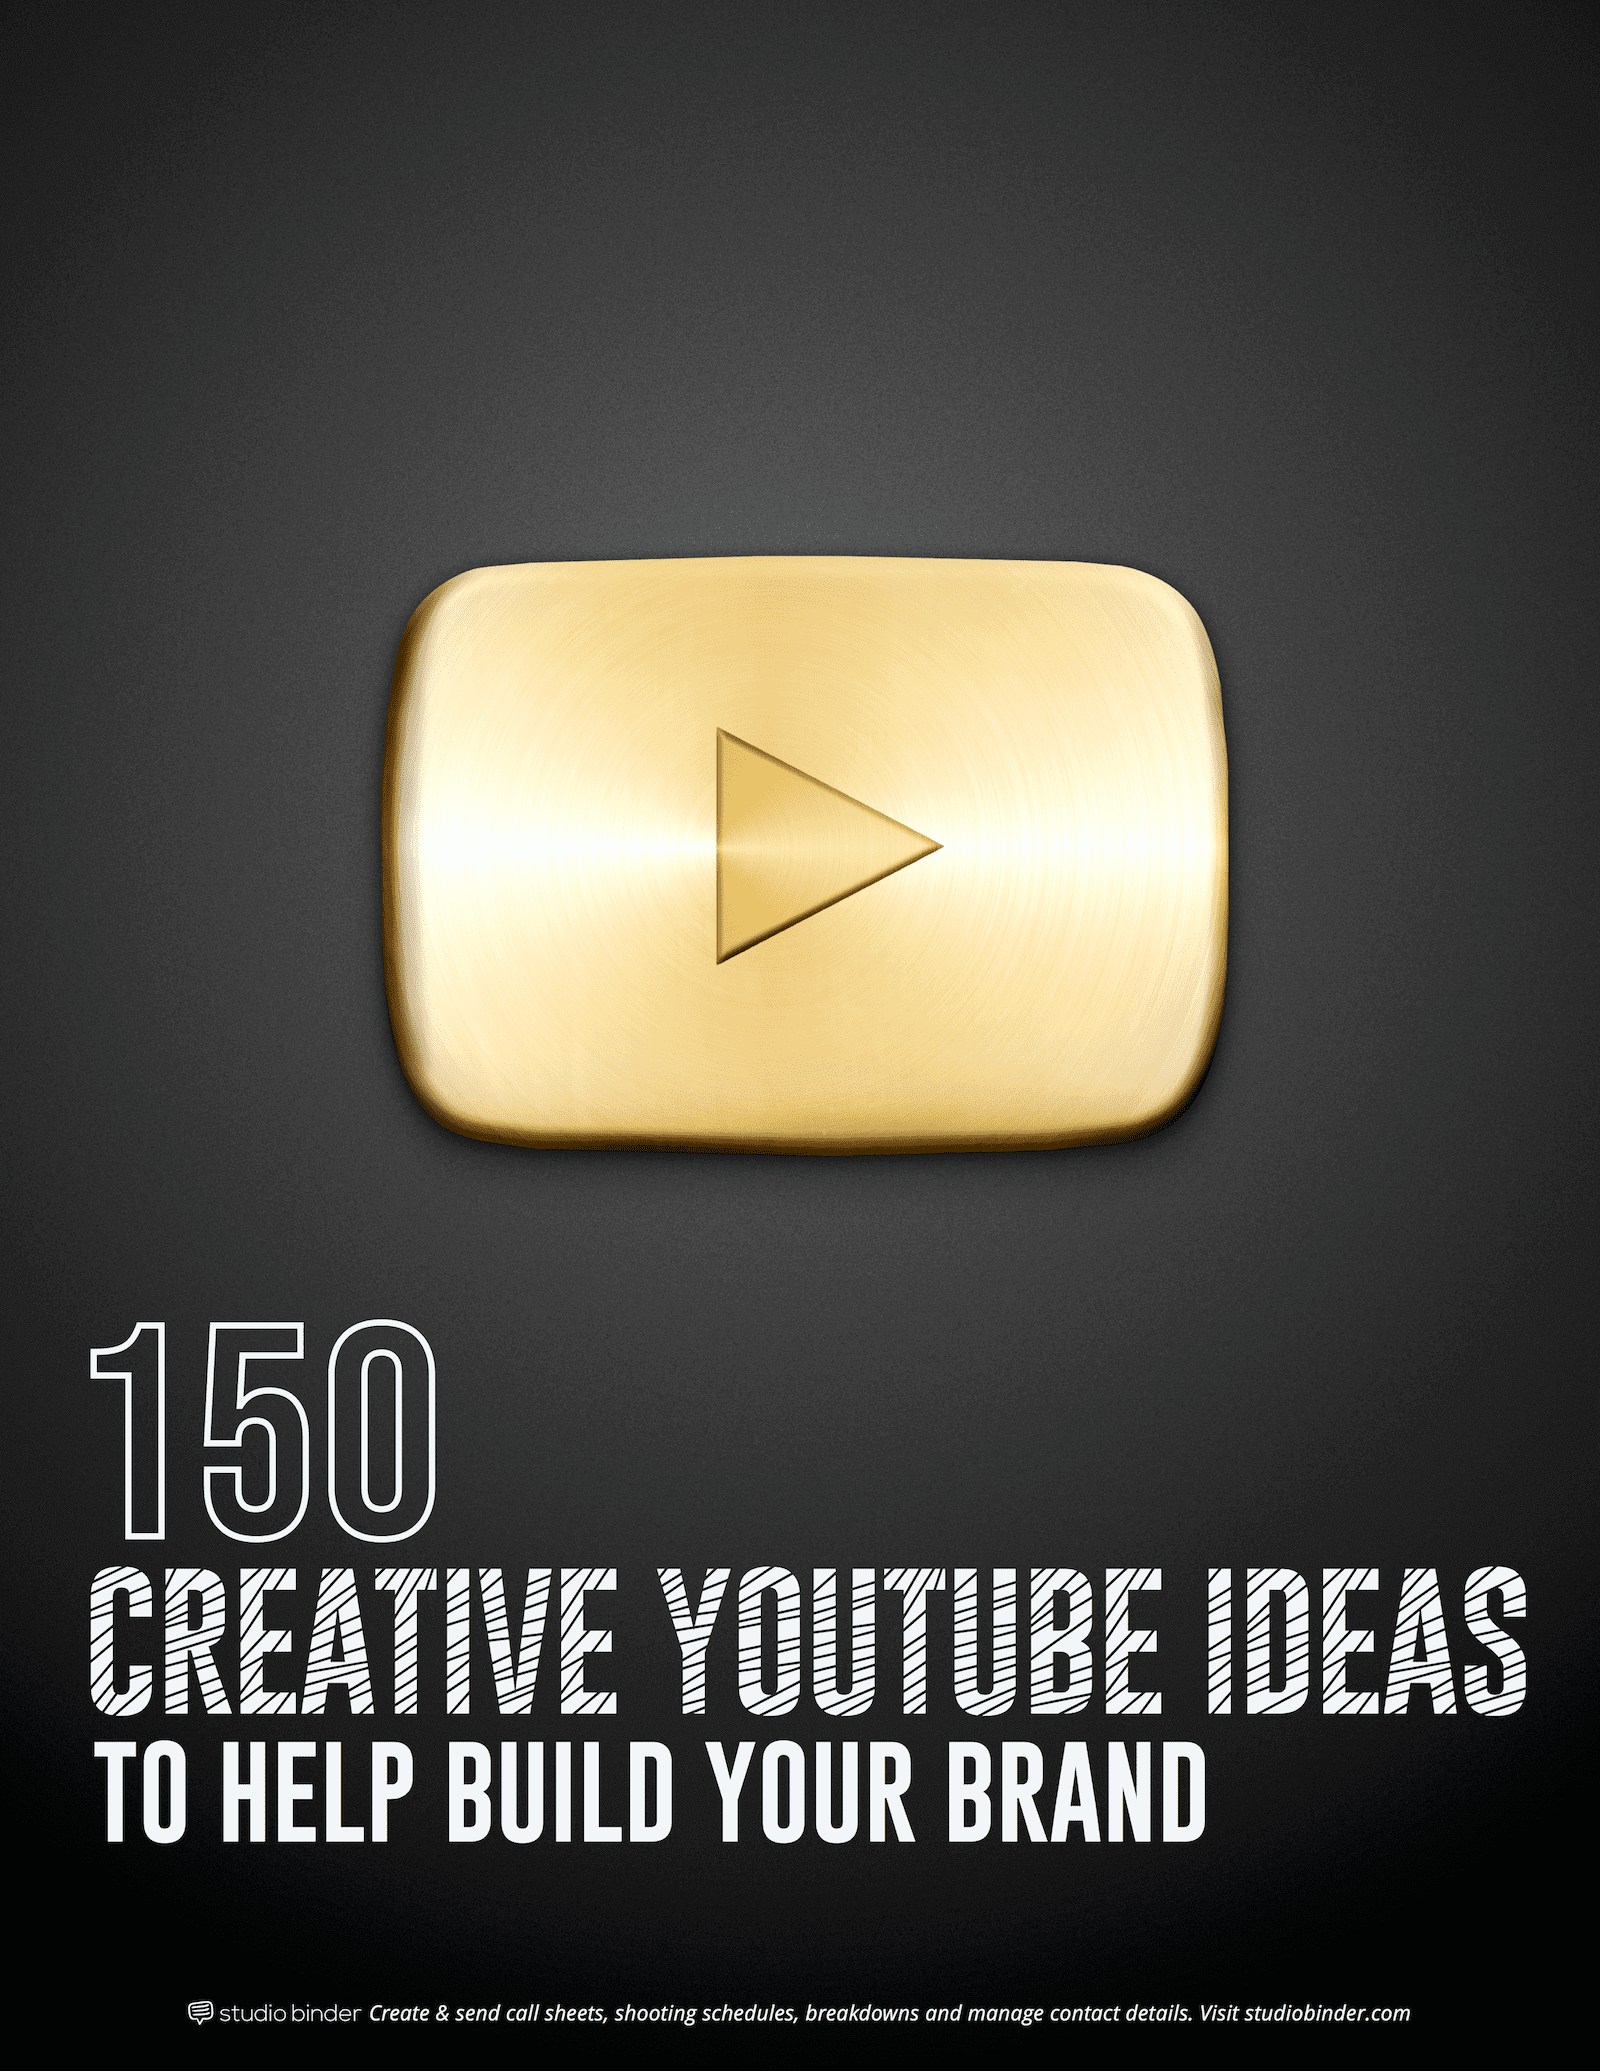 40+ Ideas For A Gaming Youtube Channel Create the best channel username
with kparser youtube name generator.